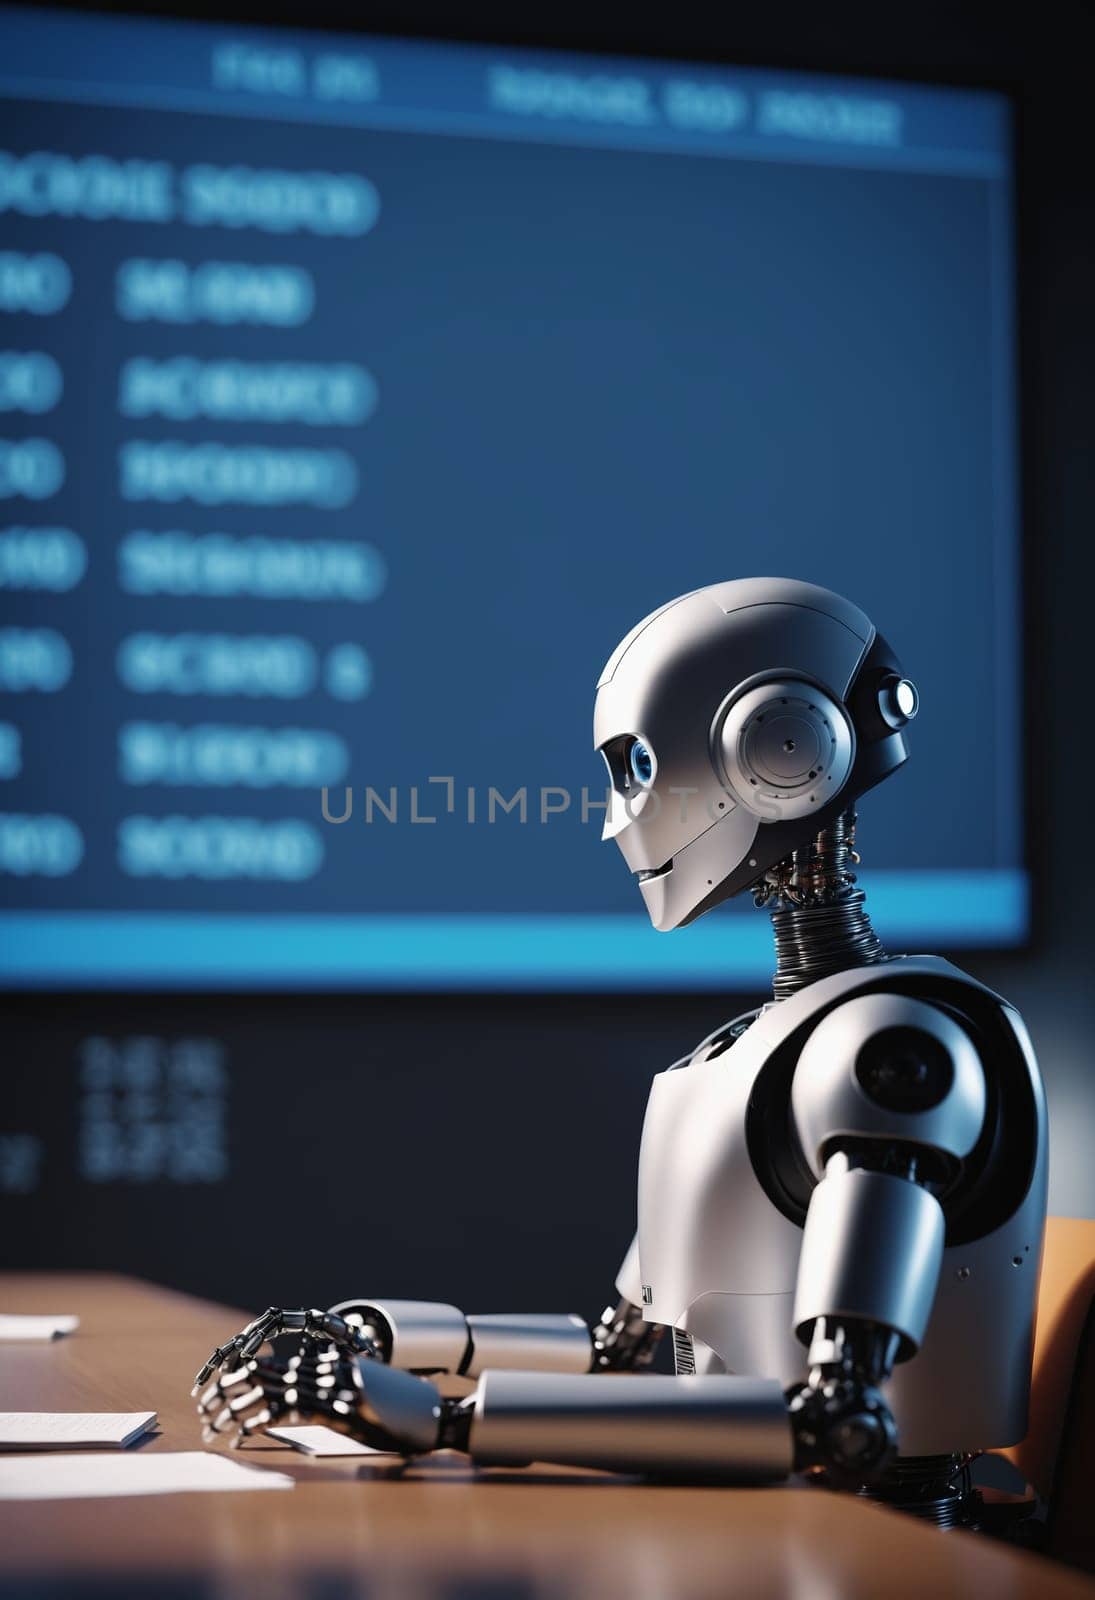 A robot is stationed at a desk with a computer monitor, keyboard, and other office supplies. It is equipped with audio equipment and other technology